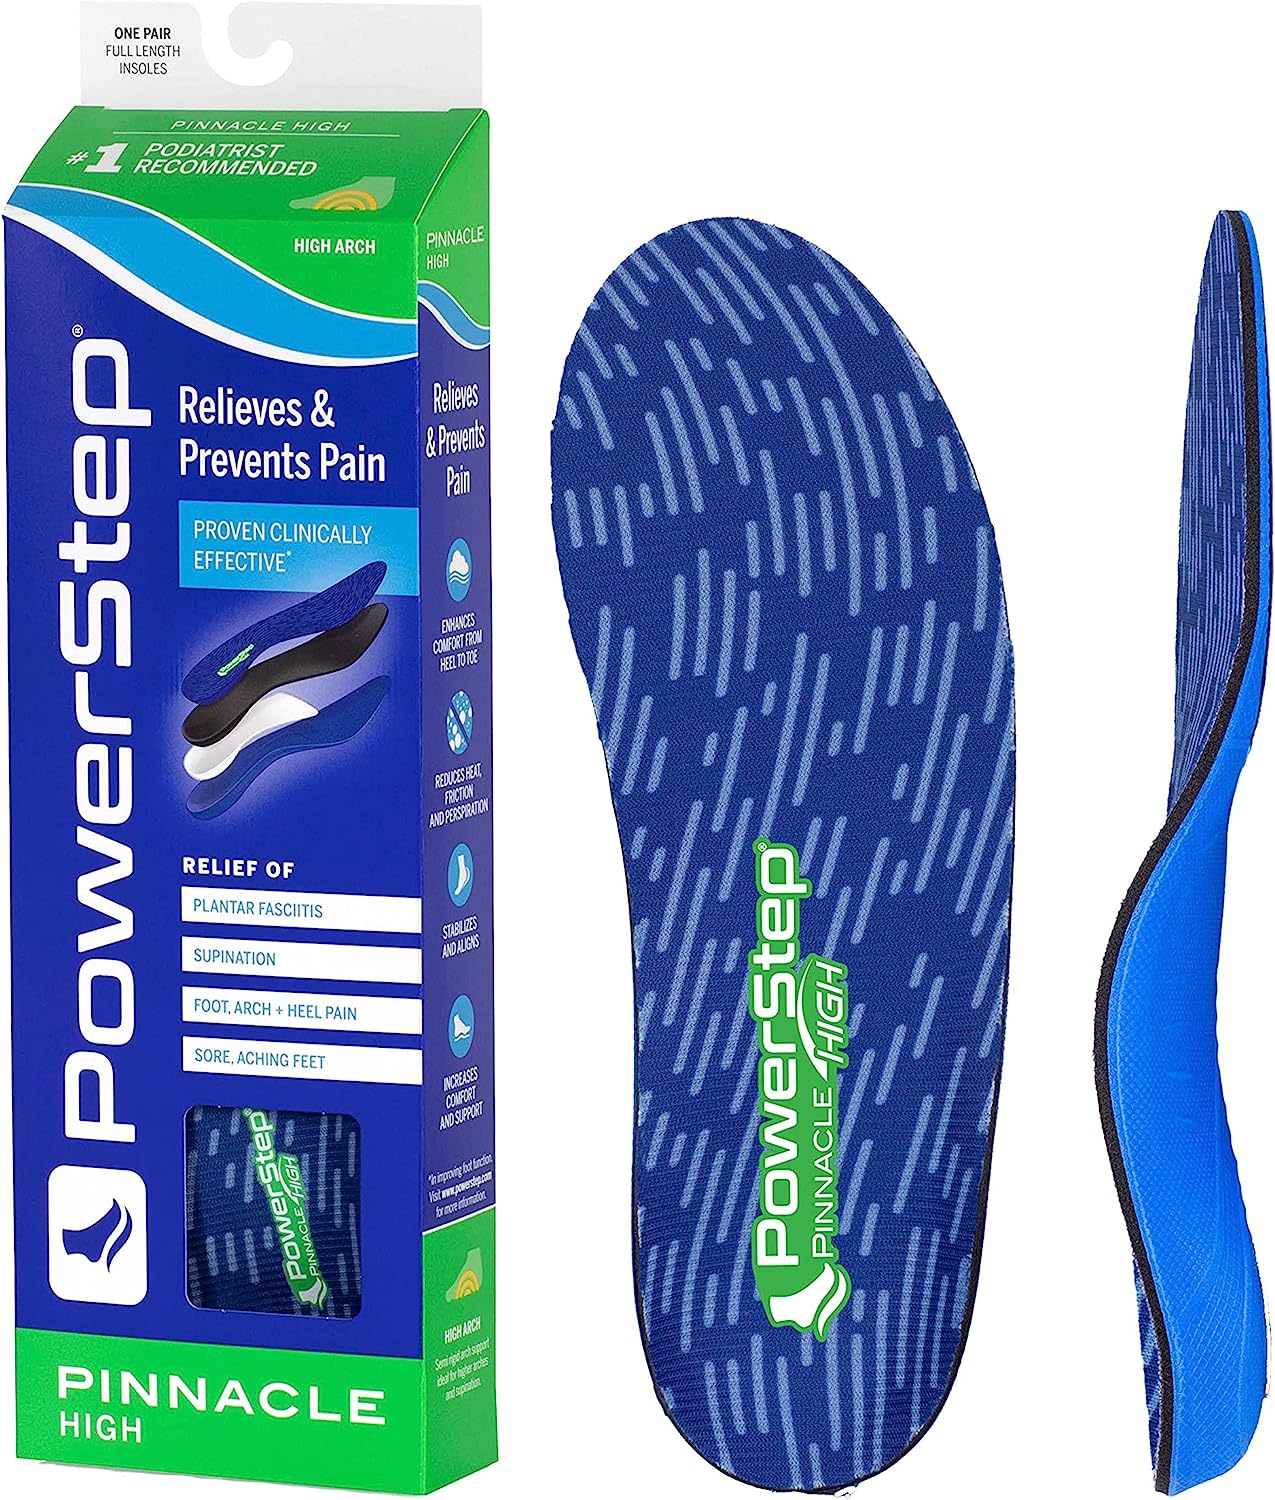 Powerstep Insoles, Pinnacle High Arch, Pain Relief [...]